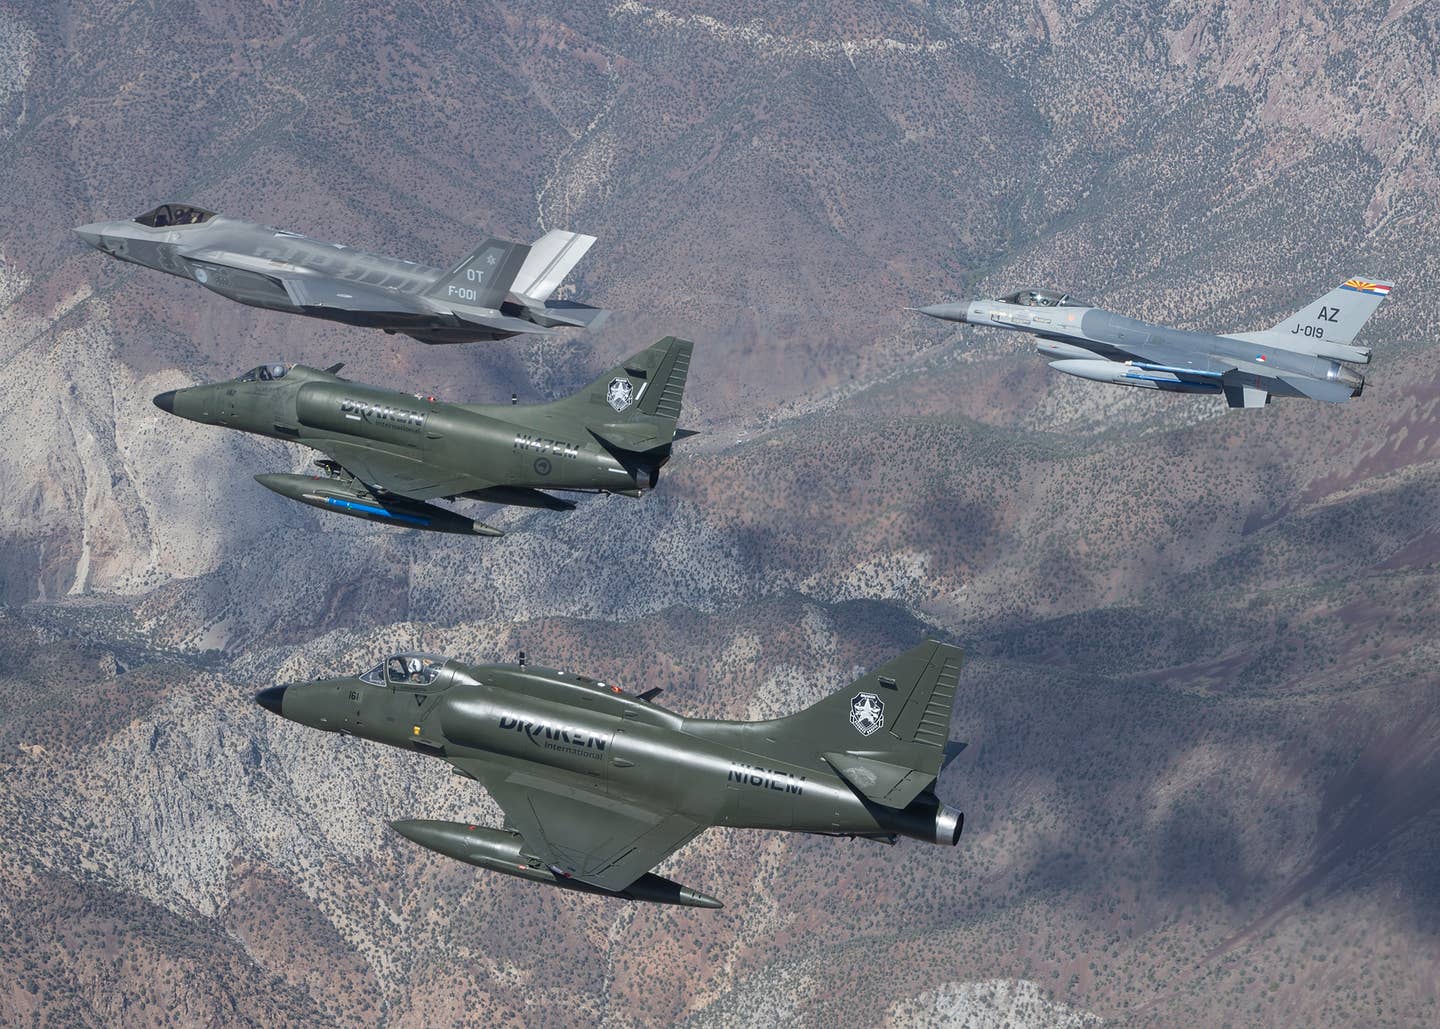 A Dutch F-35A, a Dutch F-16, and a pair of Draken International A-4 Skyhawks fly in support of an operational test exercise for the Royal Netherlands Air Force contingent at Edwards Air Force Base, California. <em>Photo courtesy Frank Crebas</em><br><a href="https://www.edwards.af.mil/News/Article/828636/a-4-skyhawks-support-f-35-operational-testing/undefined"></a>